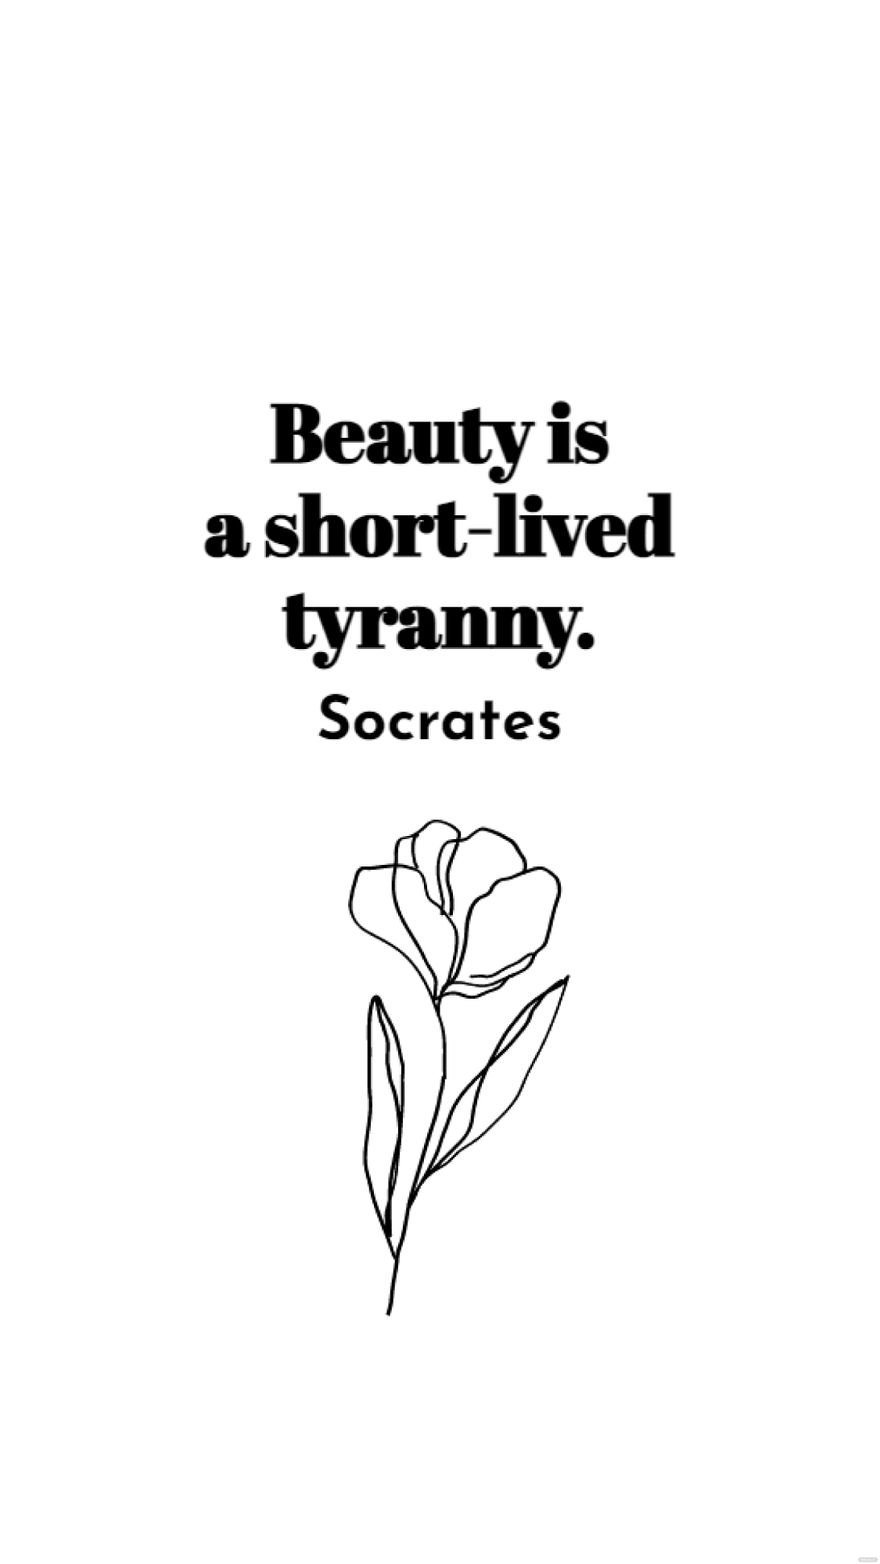 Free Socrates - Beauty is a short-lived tyranny. in JPG